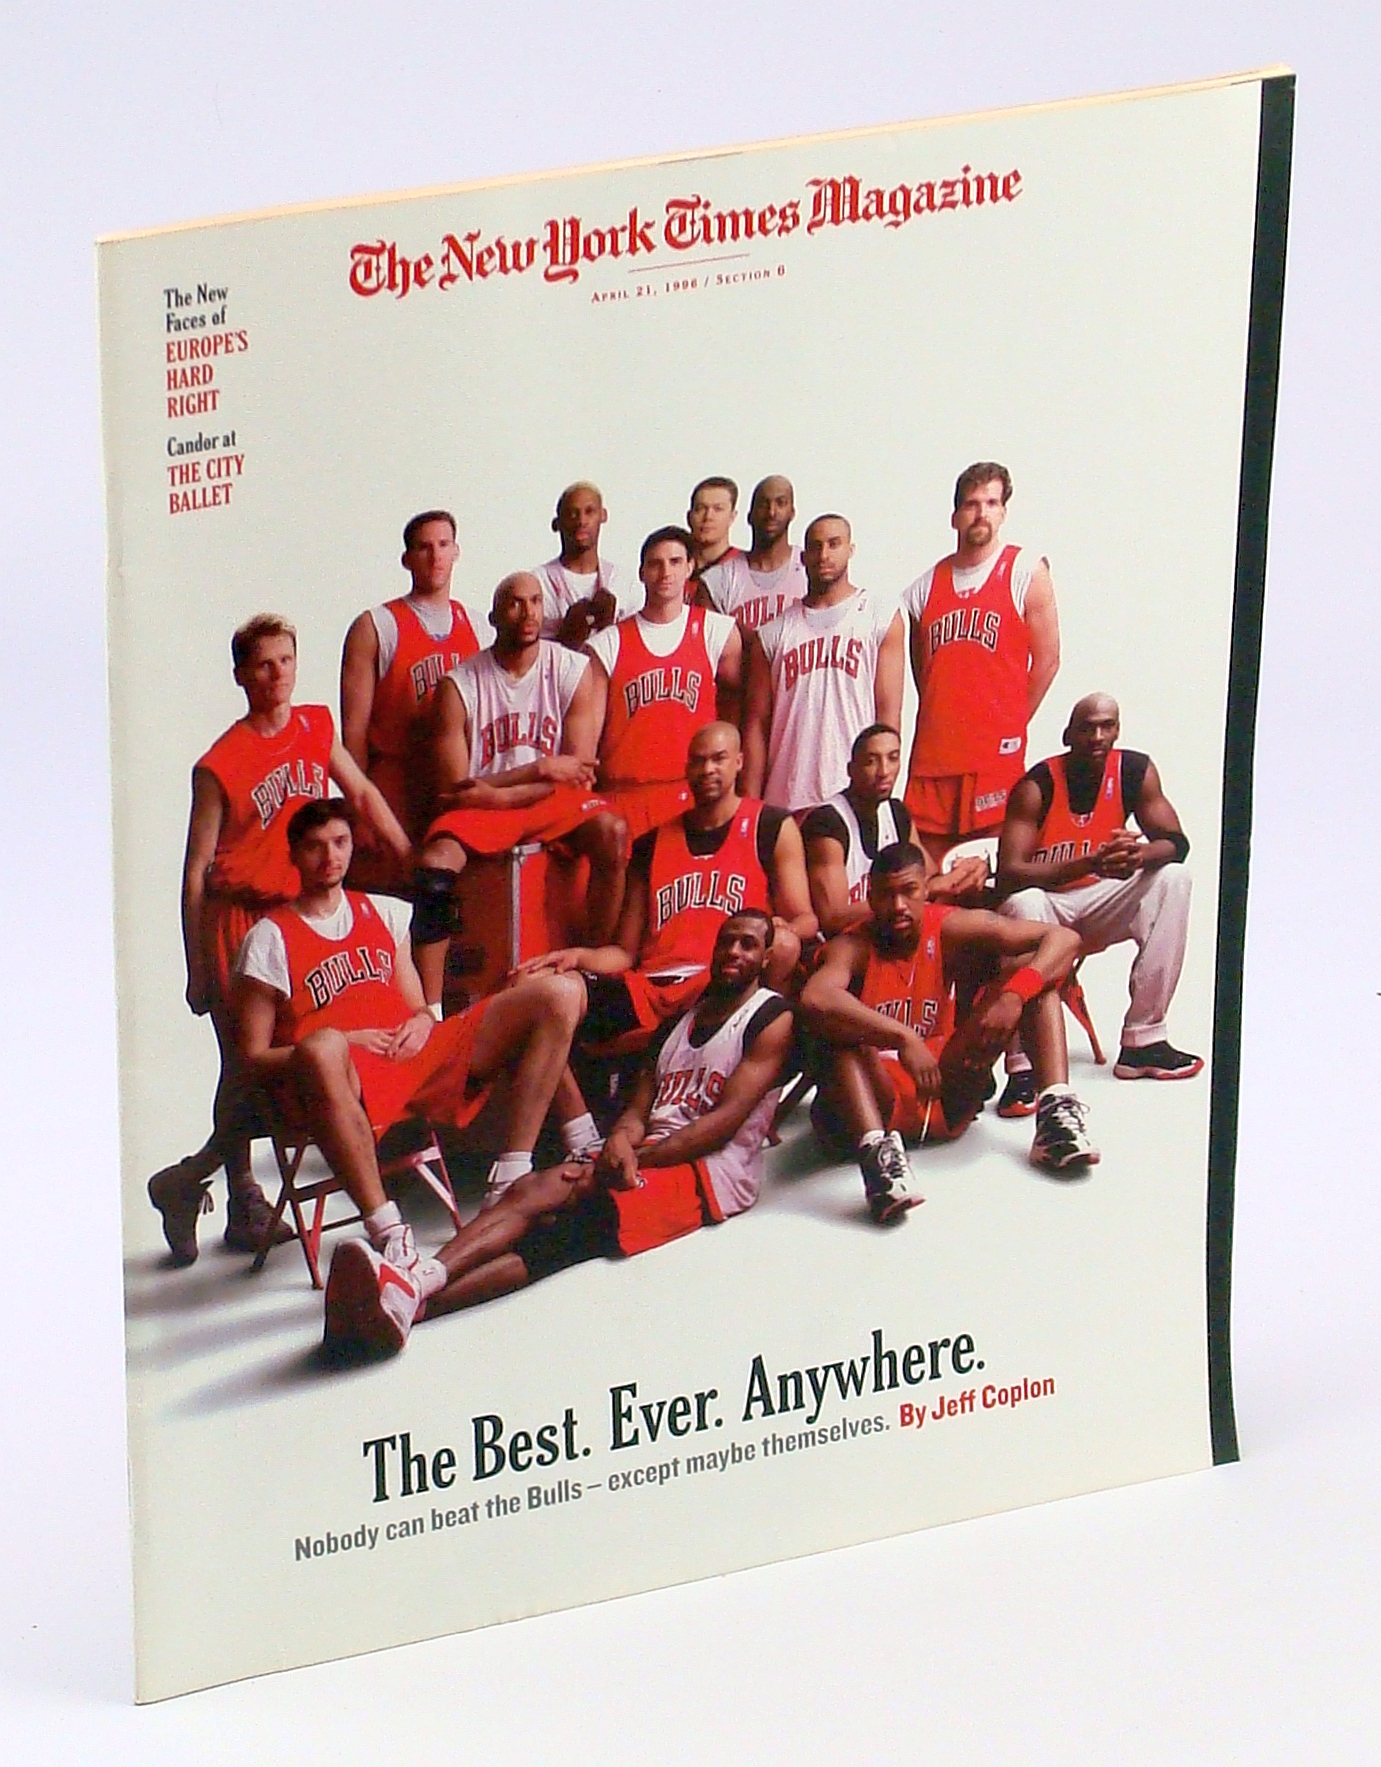 Image for The New York Times Magazine, April 21, 1996: Cover Photo of the Chicago Bulls, "The Best.  Ever.  Anywhere."